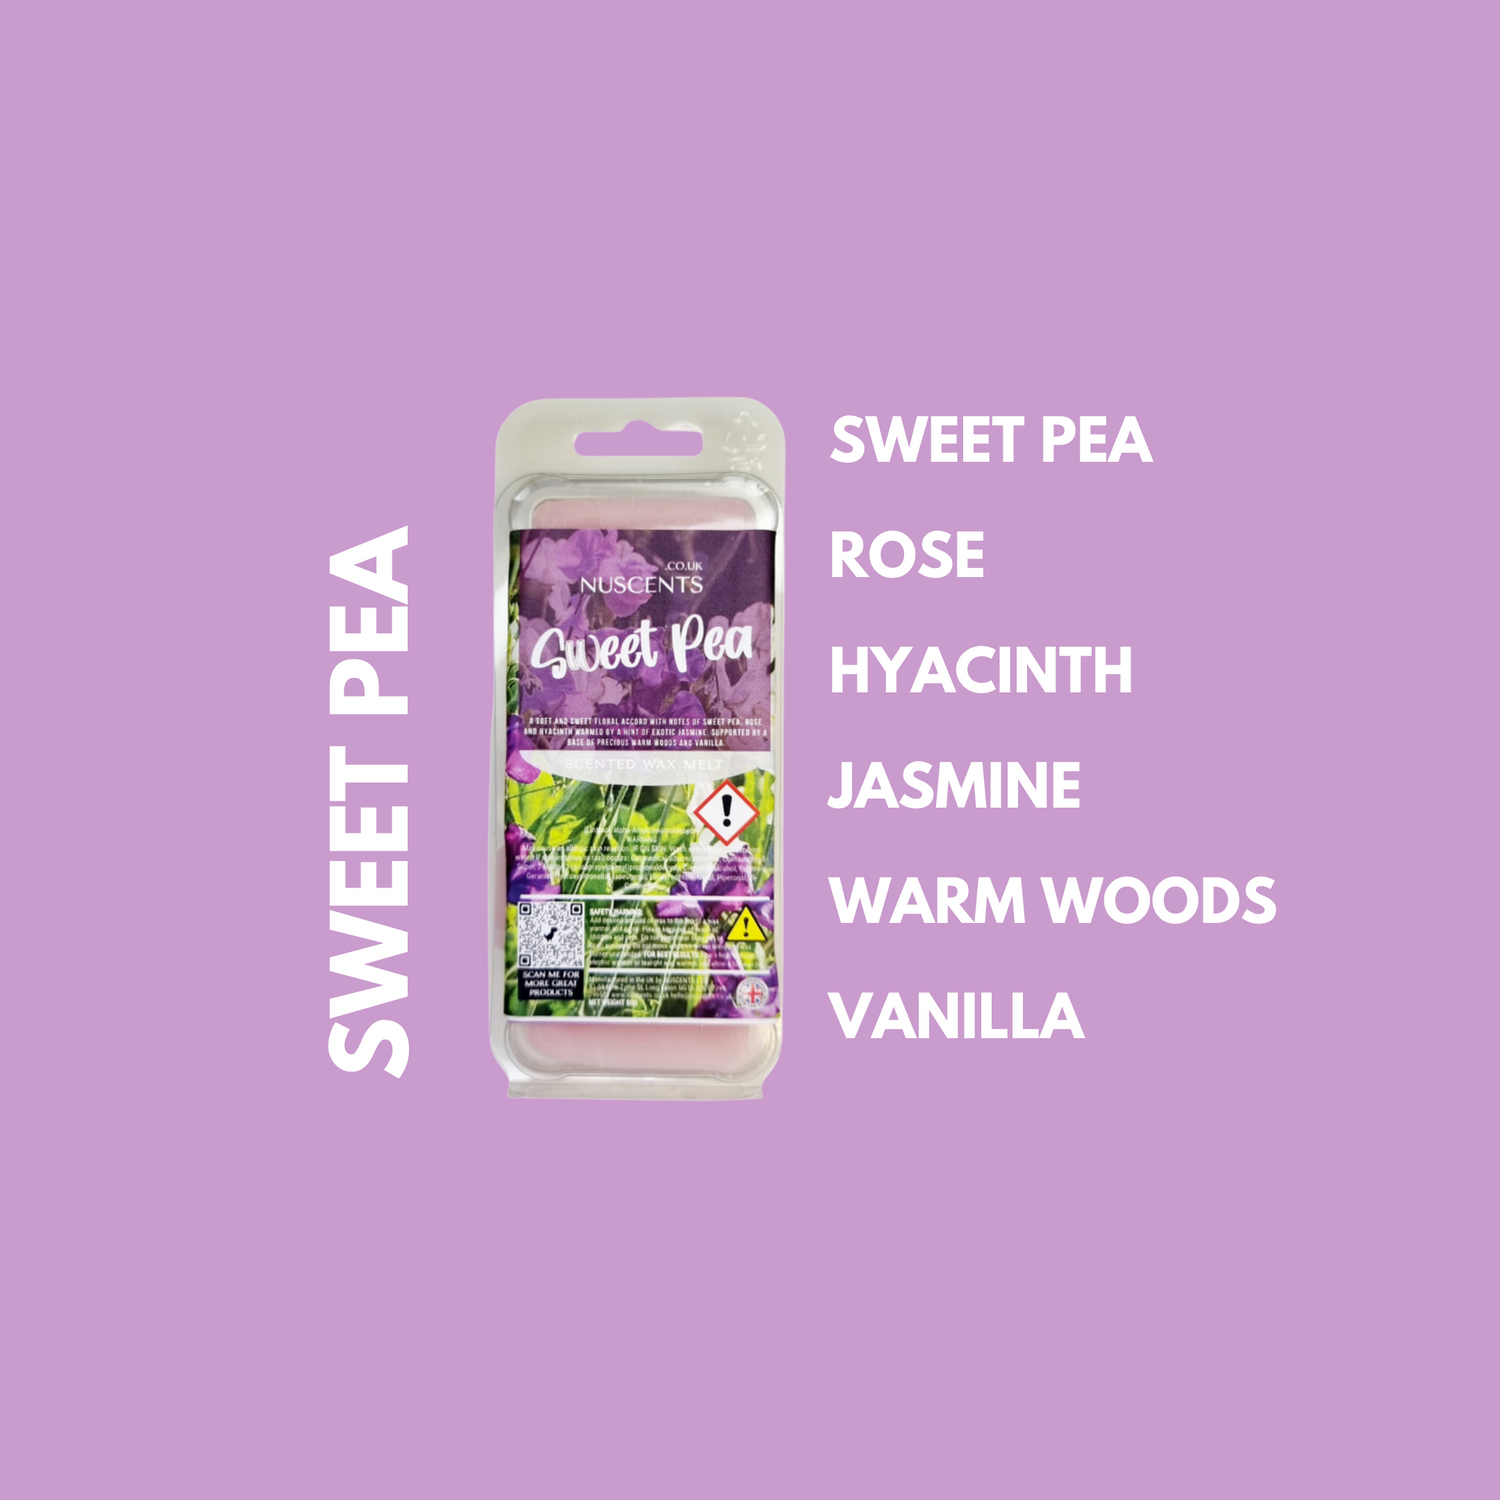 Sweet Pea Wax Melt Scent Notes